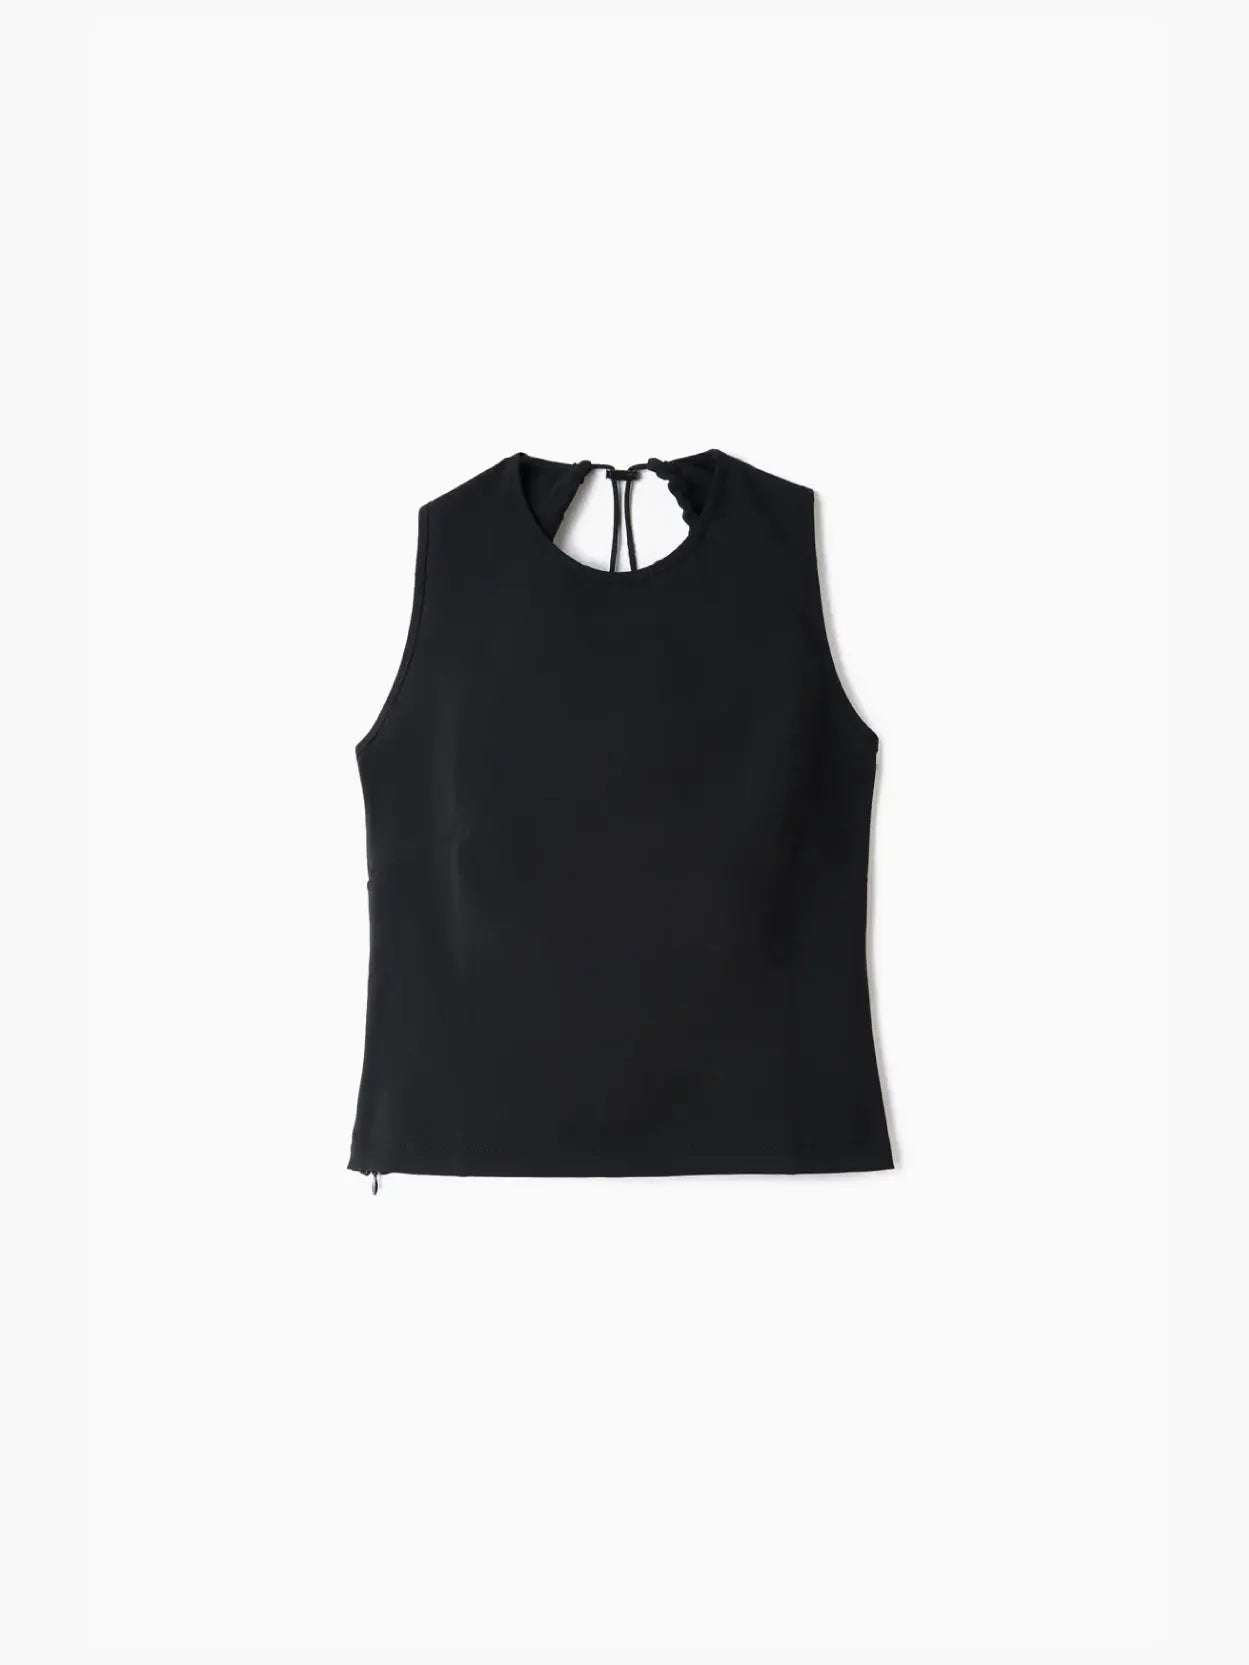 A black sleeveless top with a round neckline and a small back keyhole opening secured by a tie. The Buco Top Black by Sunnei, available at Bassalstore in Barcelona, boasts a simple, minimalist design.